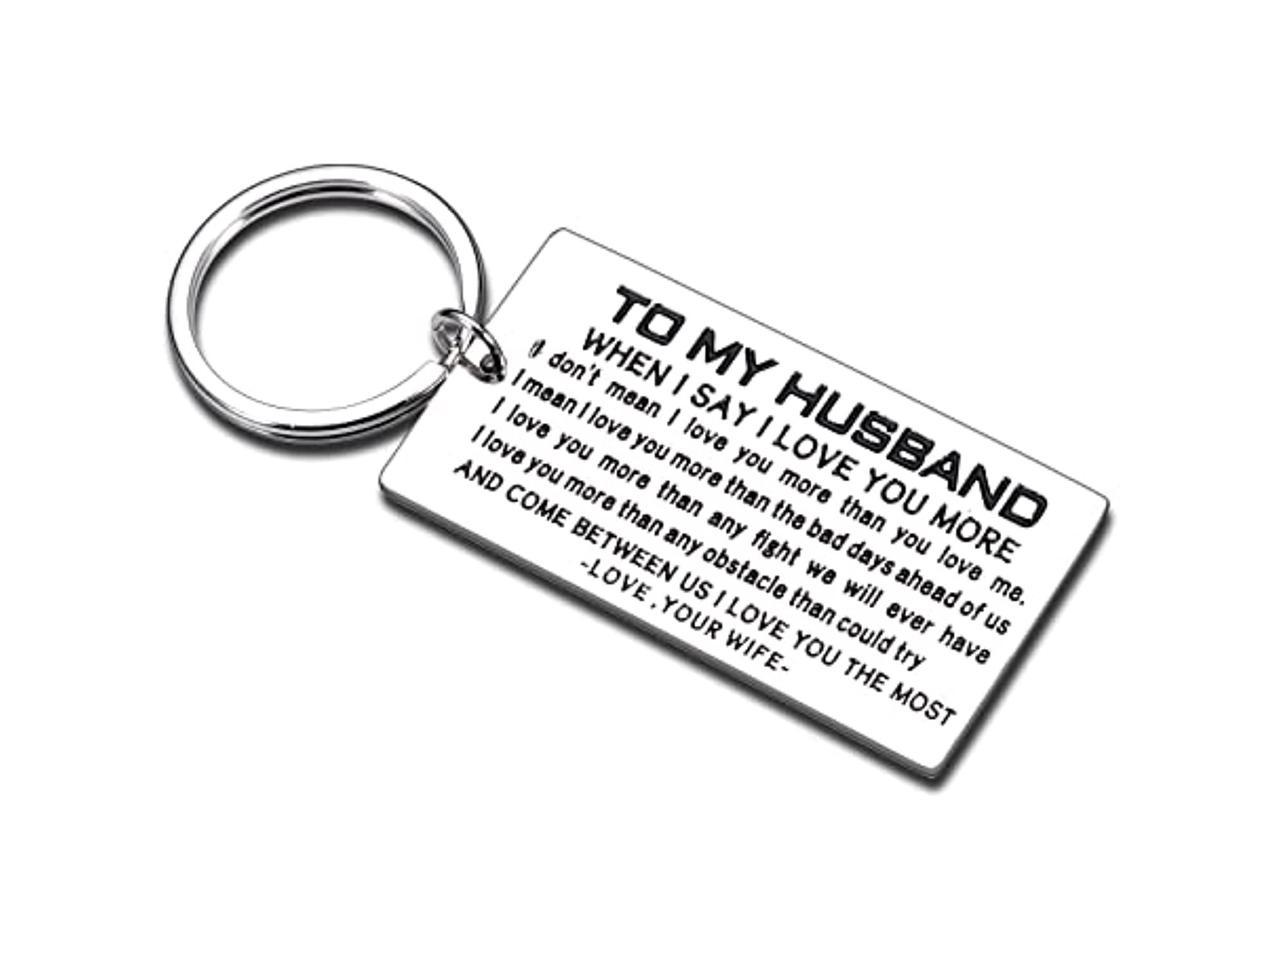 Husband Boyfriend Birthday Gifts from Girlfriend Valentines Day Gifts for Him Her Engraved Wallet Insert Card for Anniversary Husband Boyfriend I Love You Sentimental Gifts for Man Him Hubby Groom 